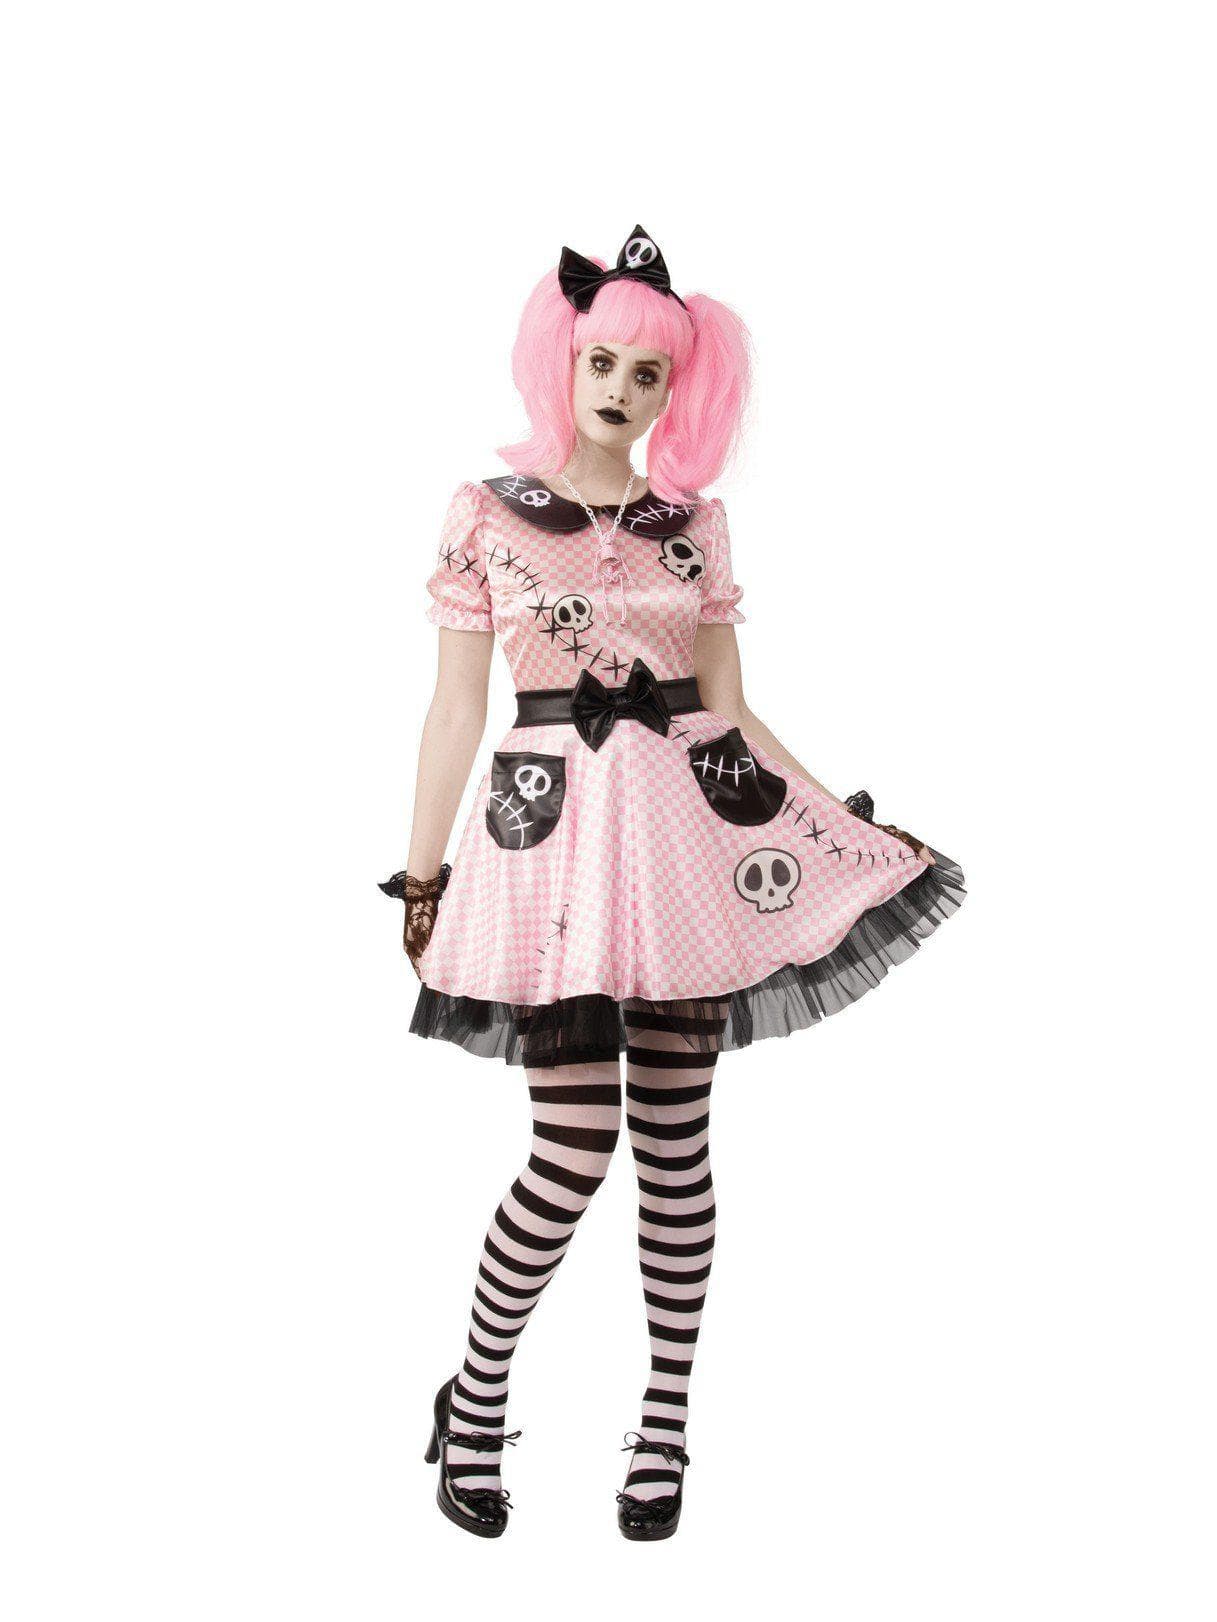 Adult Pink Skelly Costume - costumes.com